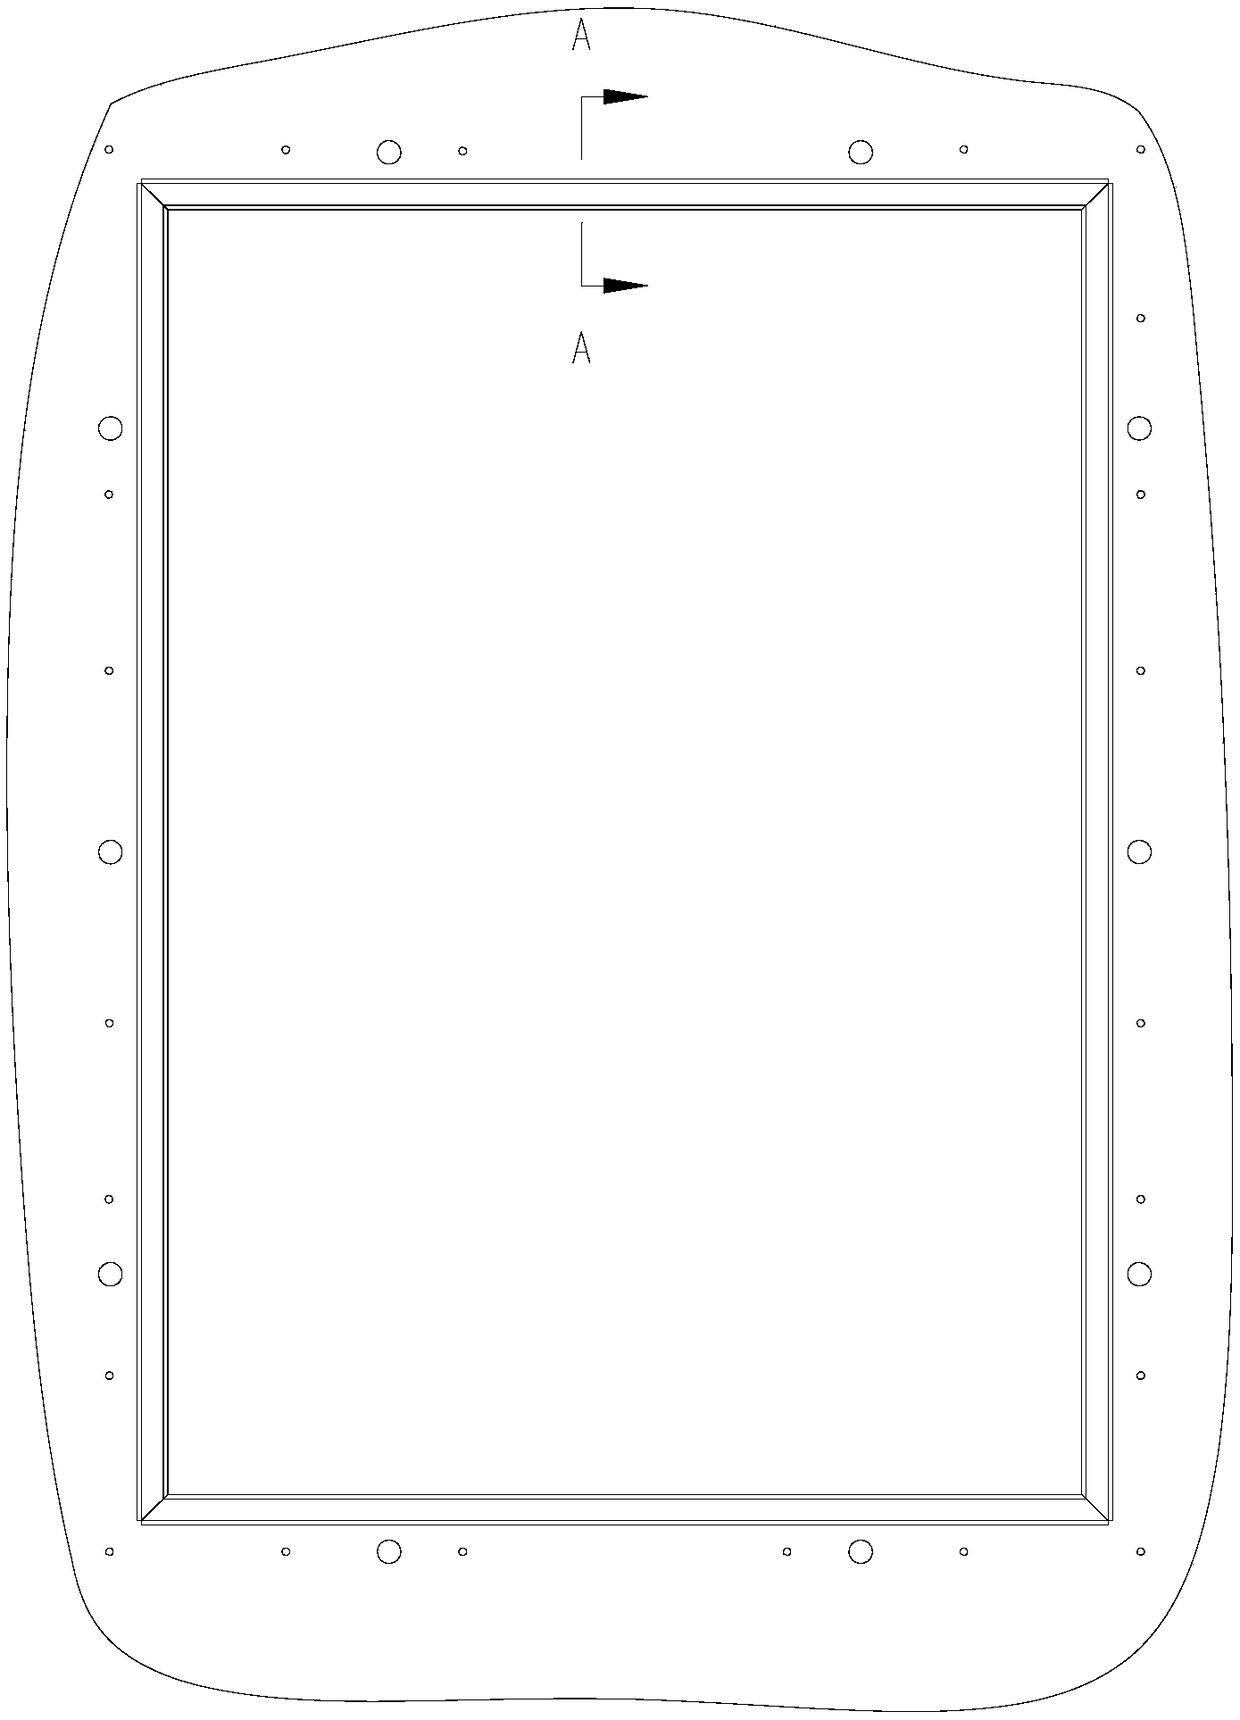 Processing method of return-shaped groove frame and a kind of series insert splicing bending mold